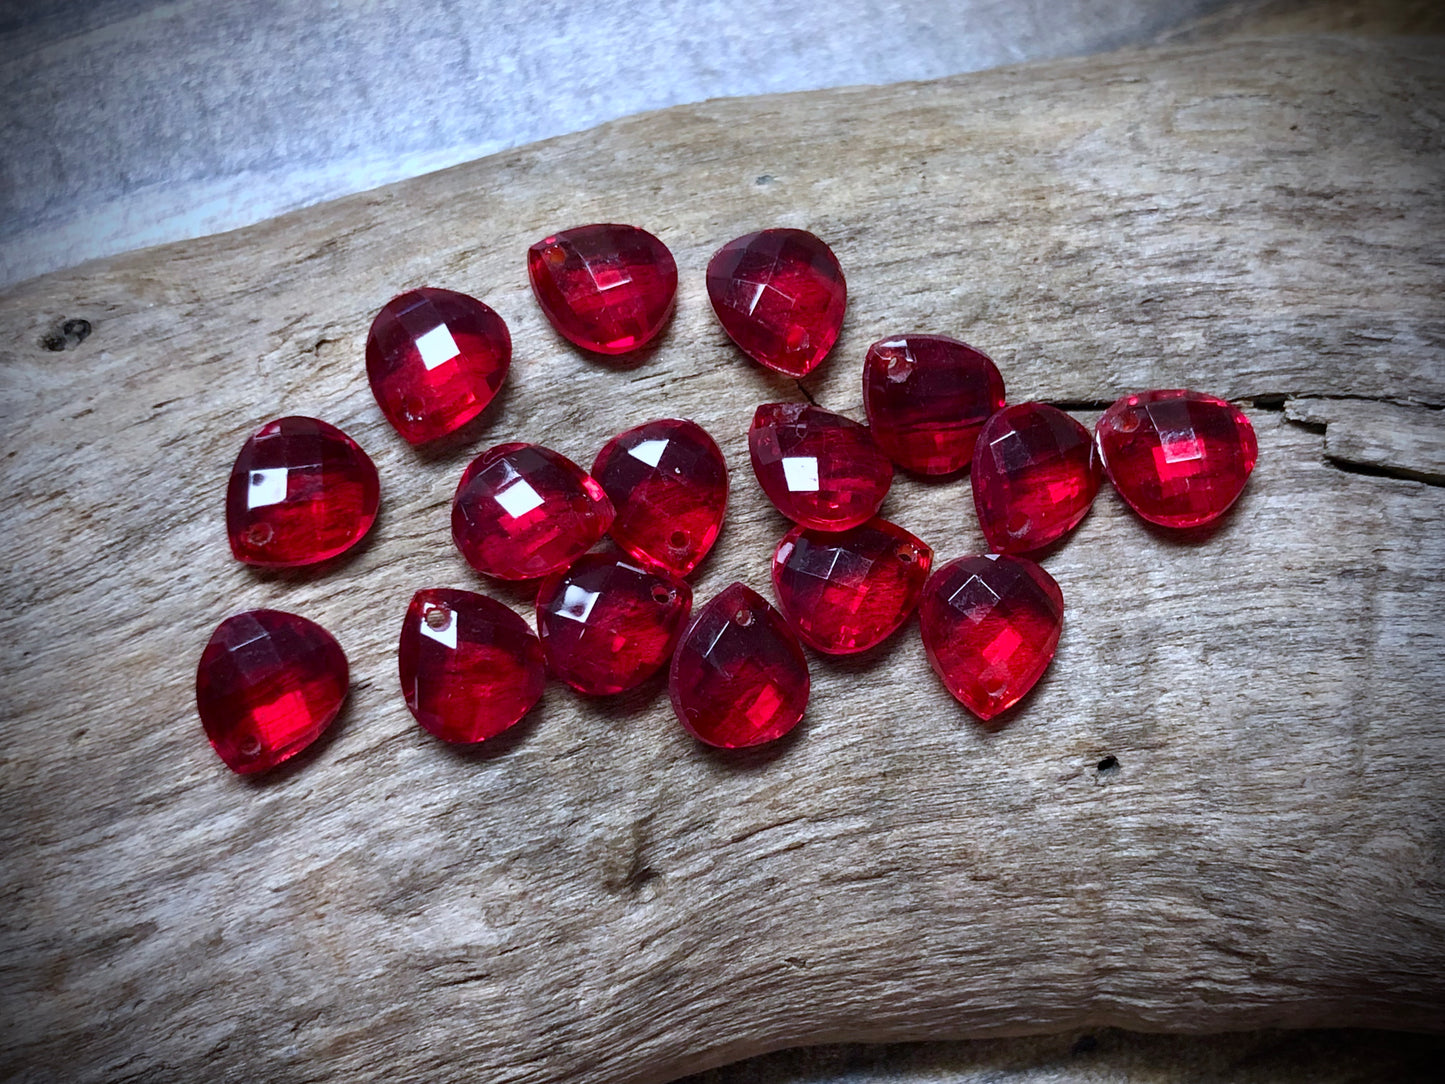 Vintage Czech Glass Faceted Briolette Bead - 9mm x 8mm - Ruby